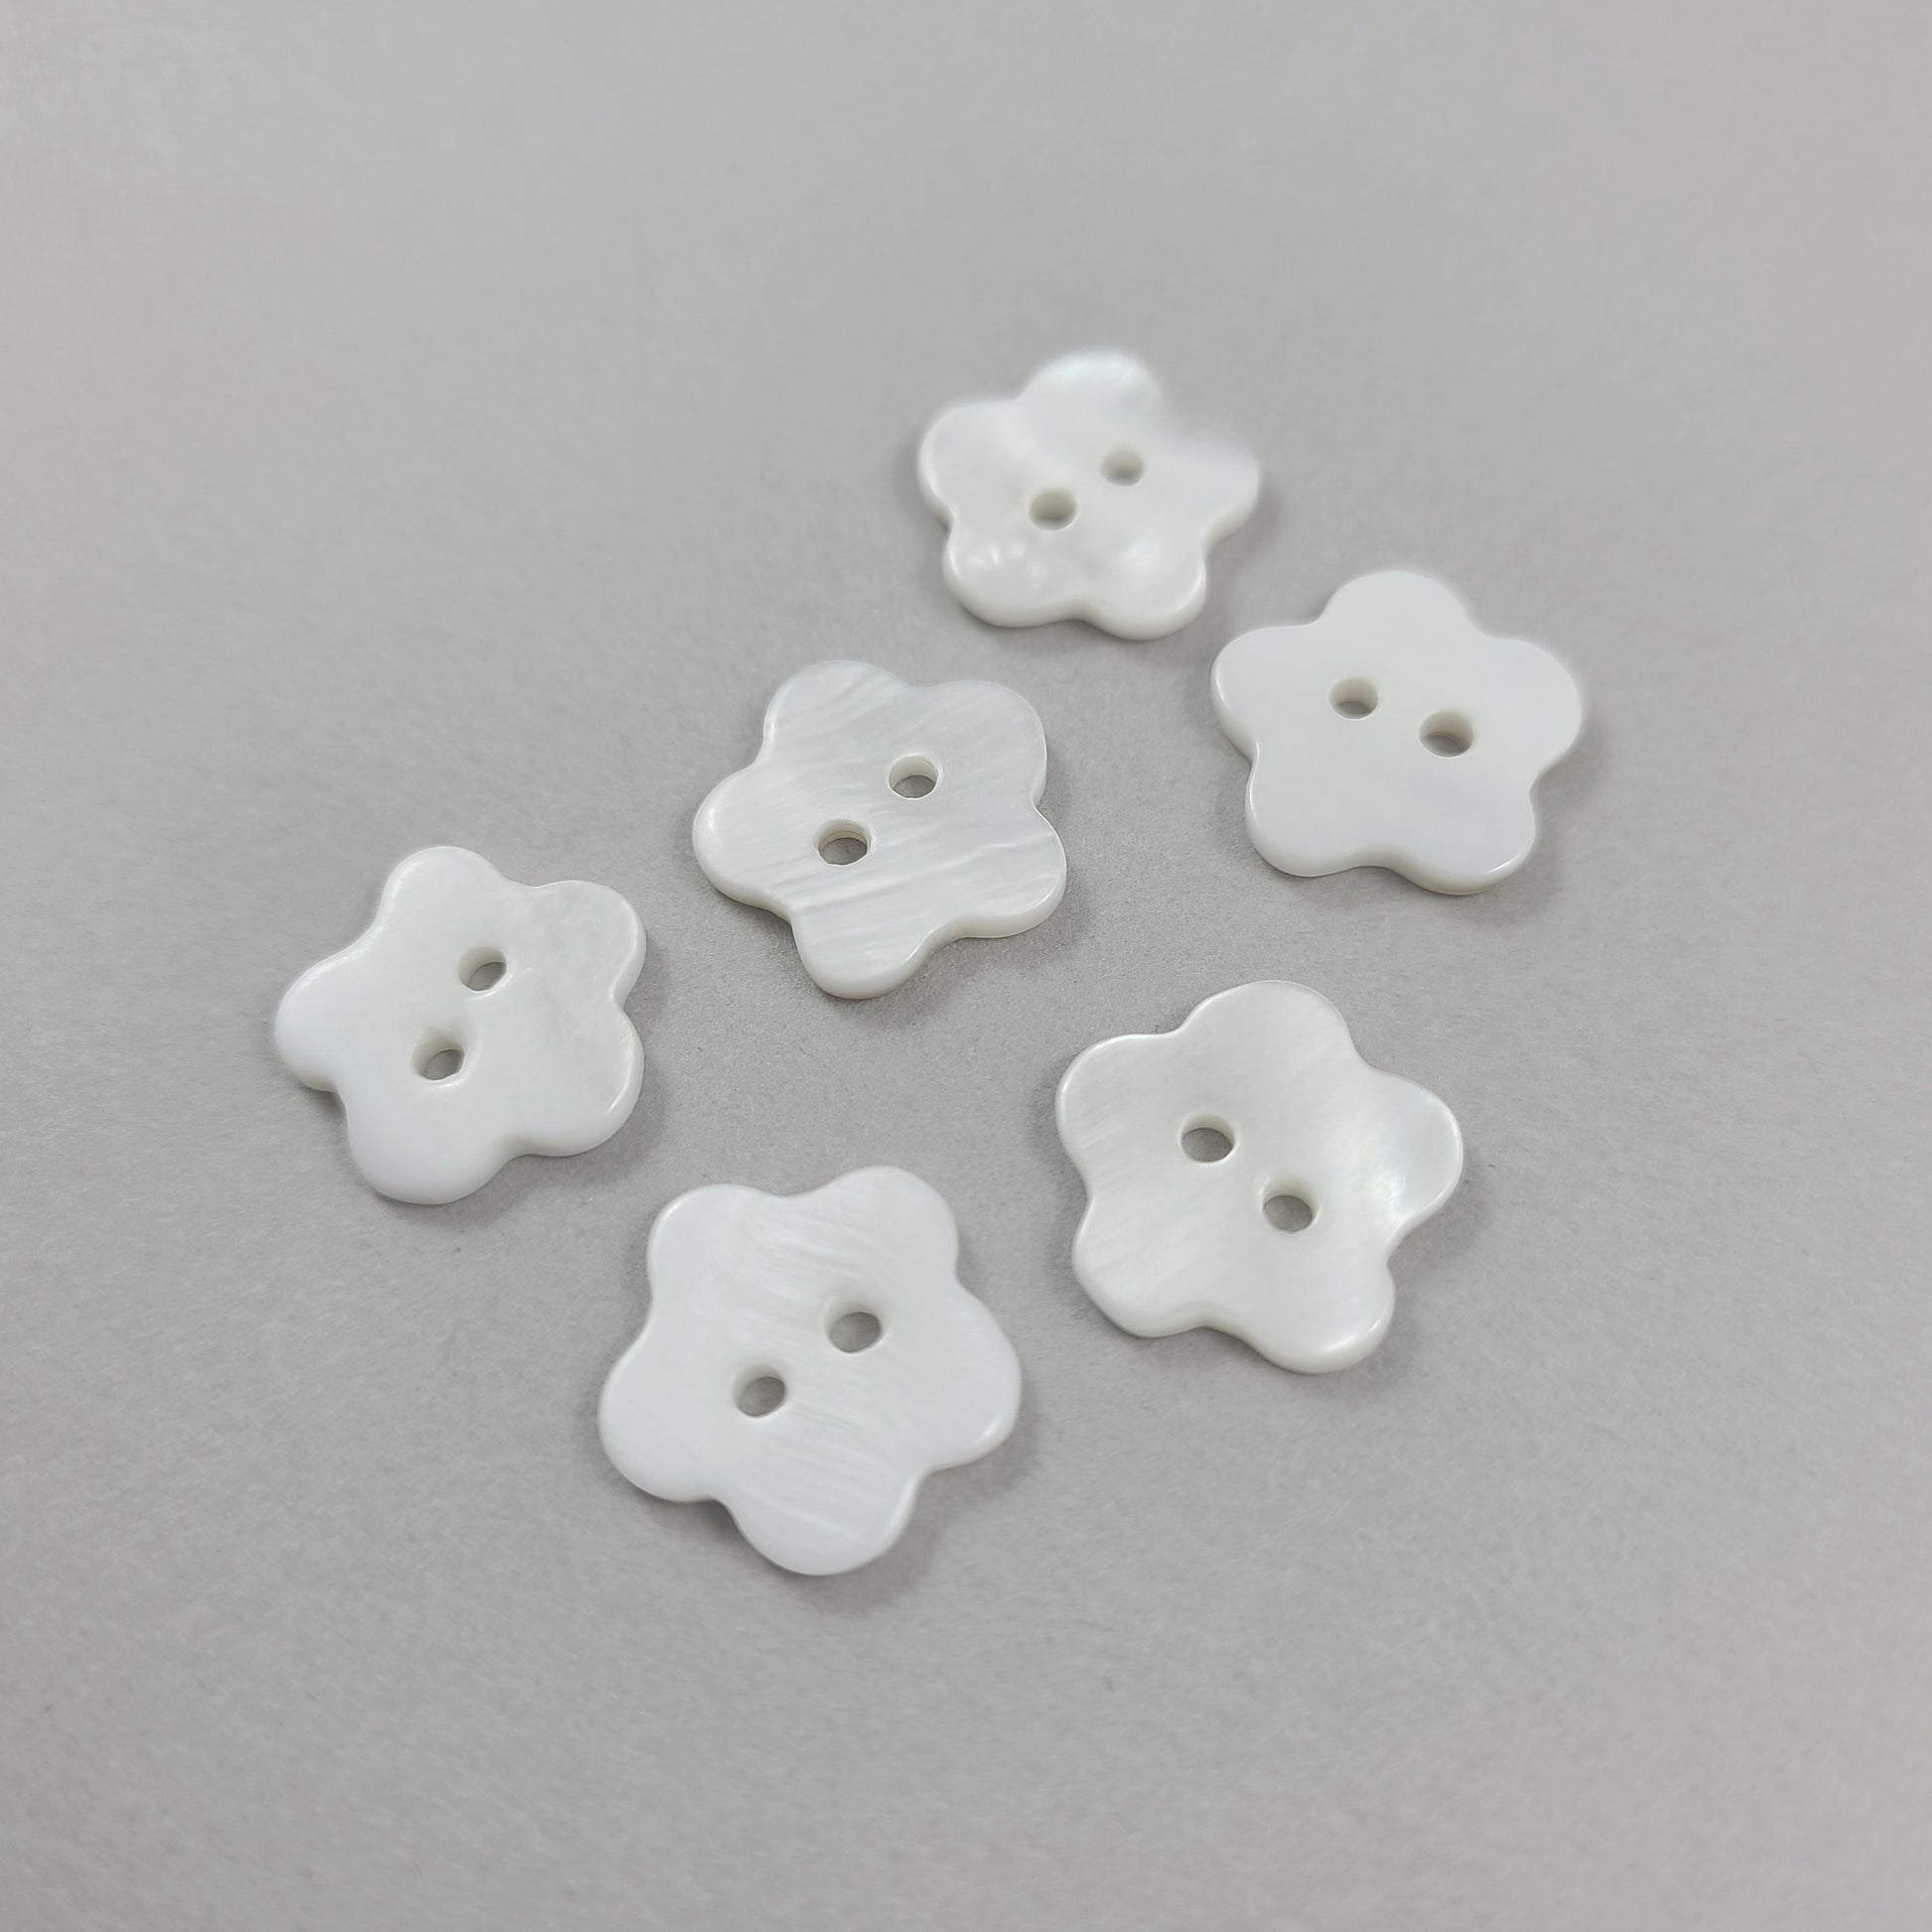 Flower shape MOP buttons - Mother of Pearl Shell Buttons 14mm - set of 6 floral white buttons